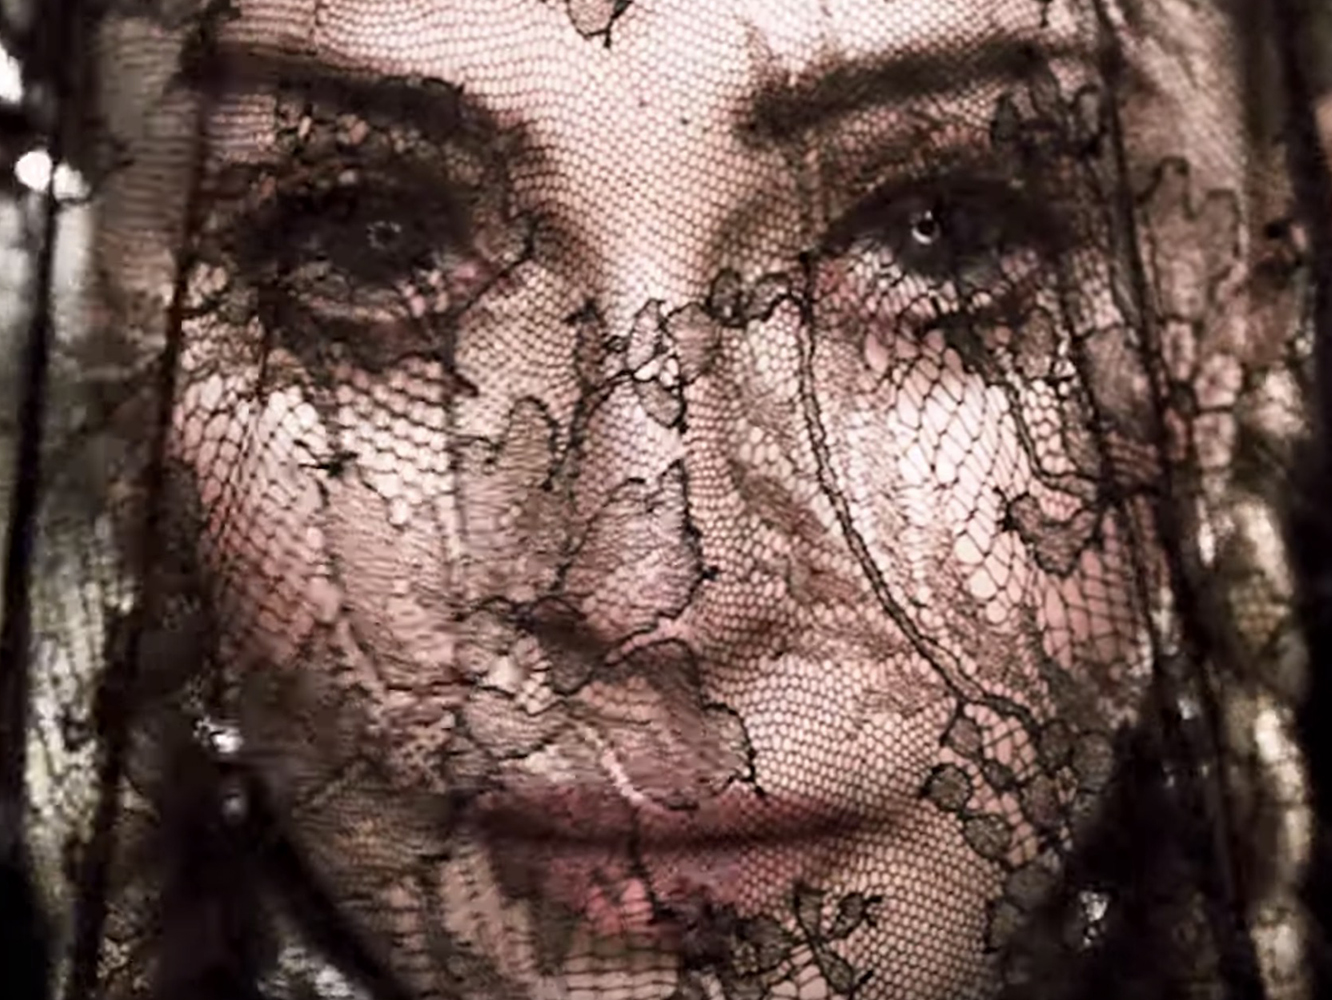  The old Madonna can come to the phone right now… ‘Dark Ballet’ cuenta con un espectacular vídeo